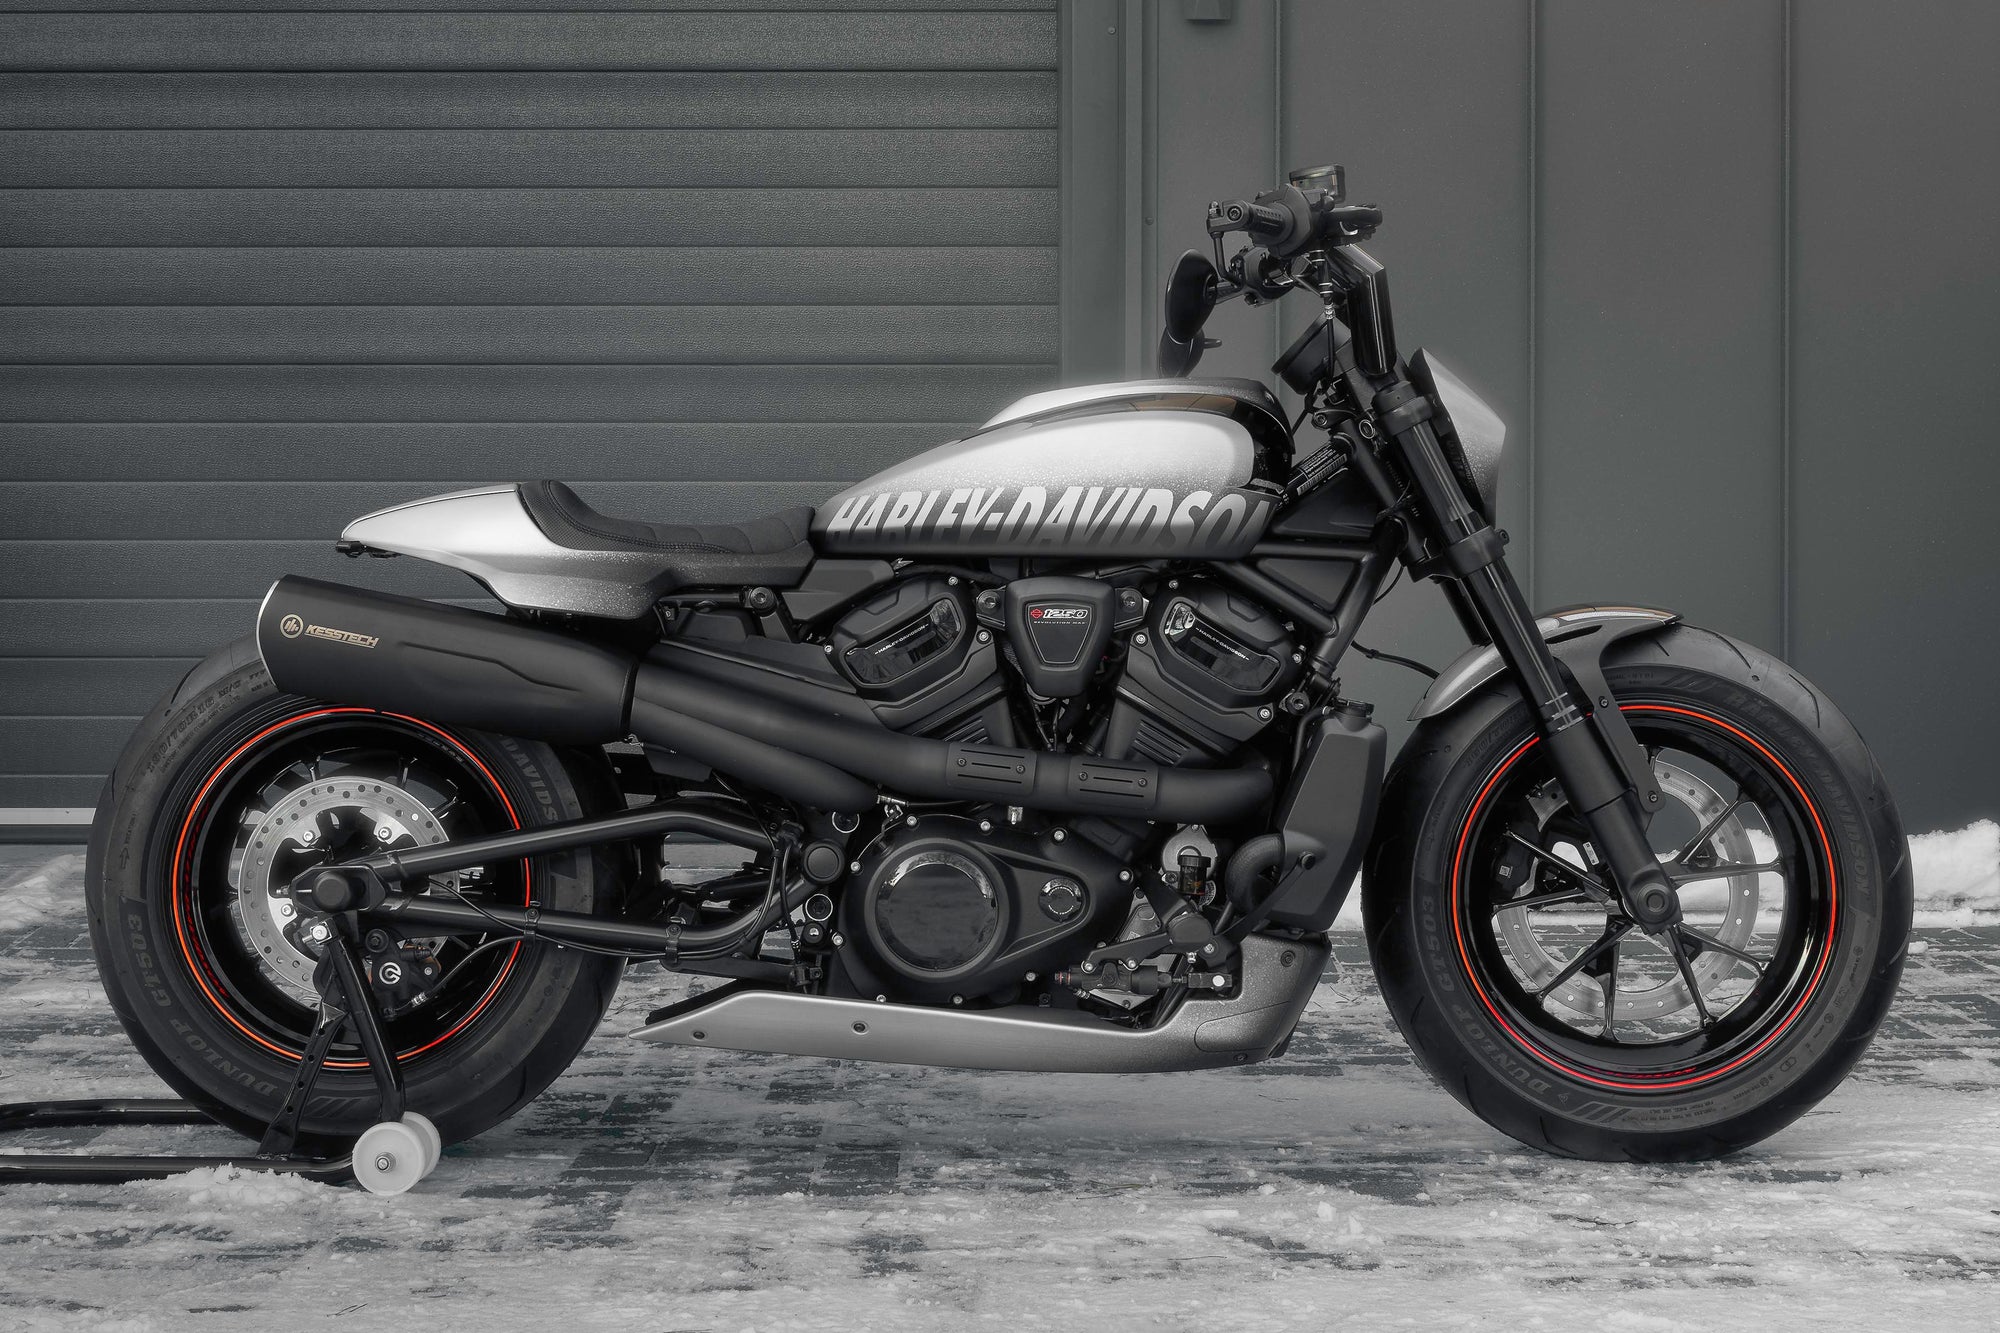 Modified Harley Davidson Sportster S motorcycle with Killer Custom parts from the side outside with some visible snow and a modern garage in the background